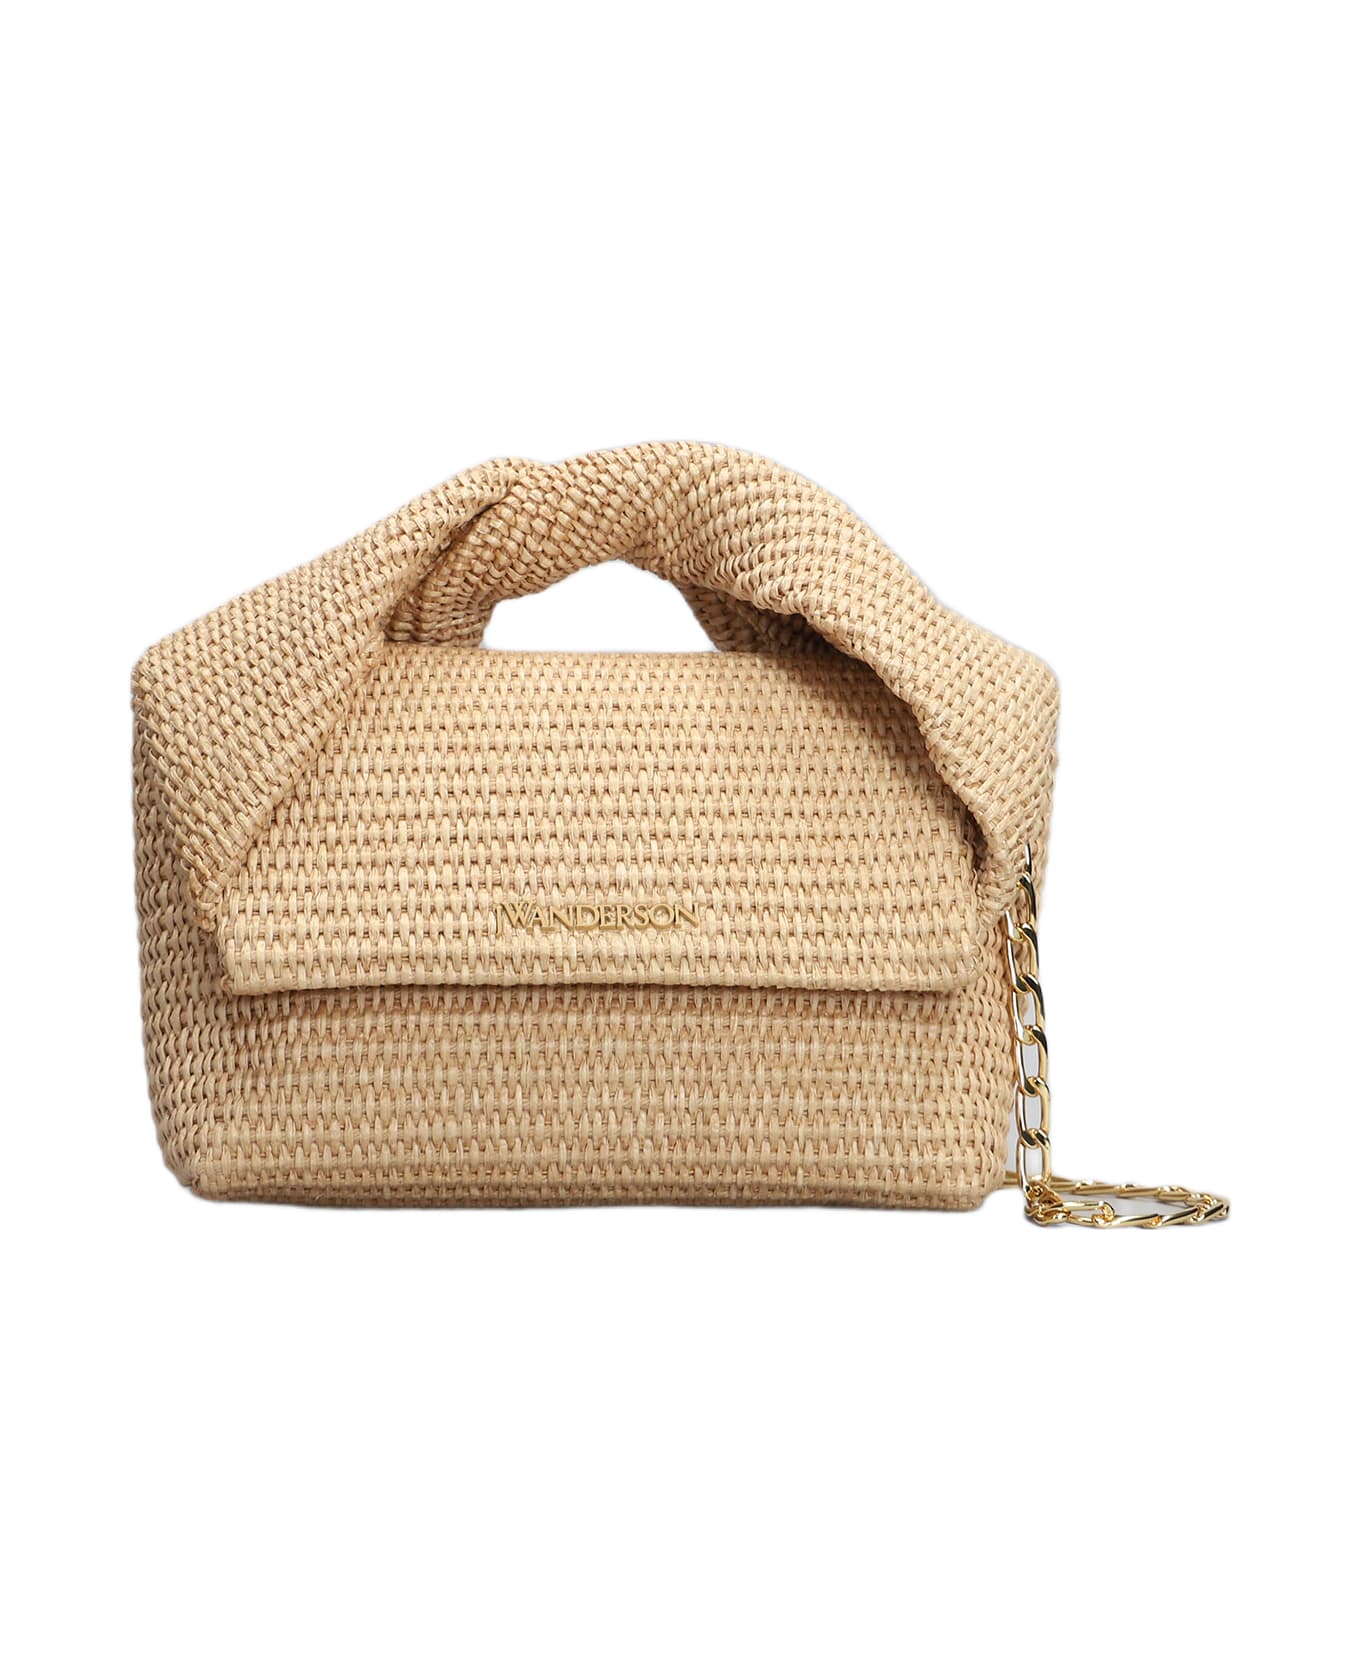 J.W. Anderson Twisted Hand Bag In Beige Cotton - NATURAL トートバッグ